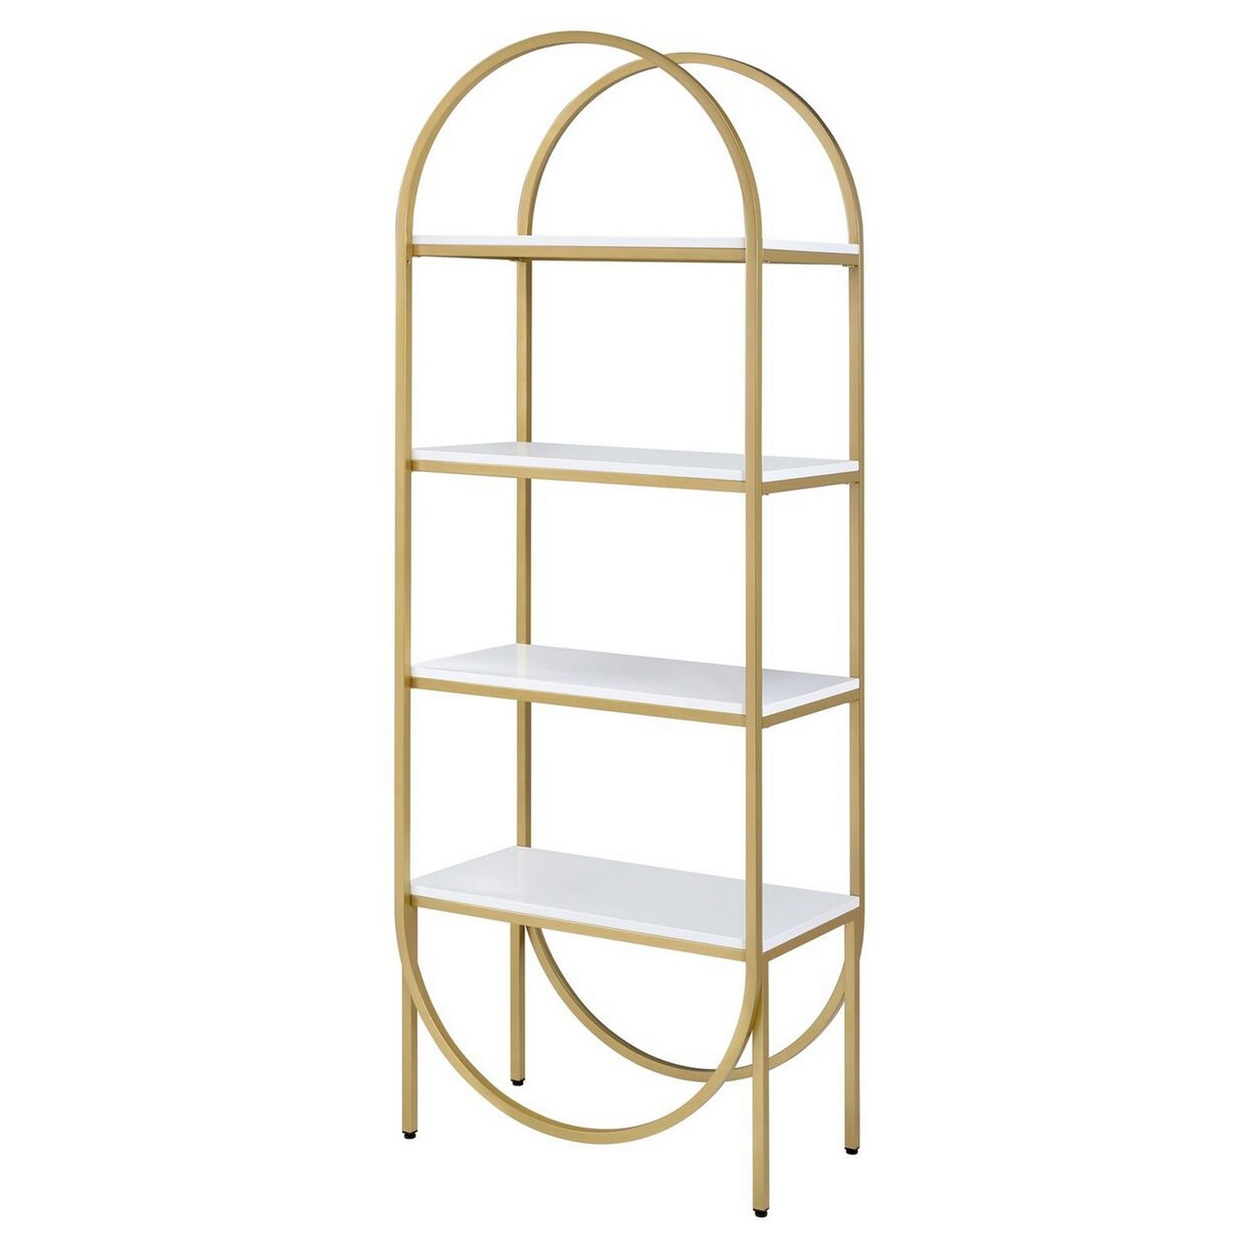 Arched Metal Frame Wooden Bookshelf With 4 Open Compartments,White And Gold- Saltoro Sherpi